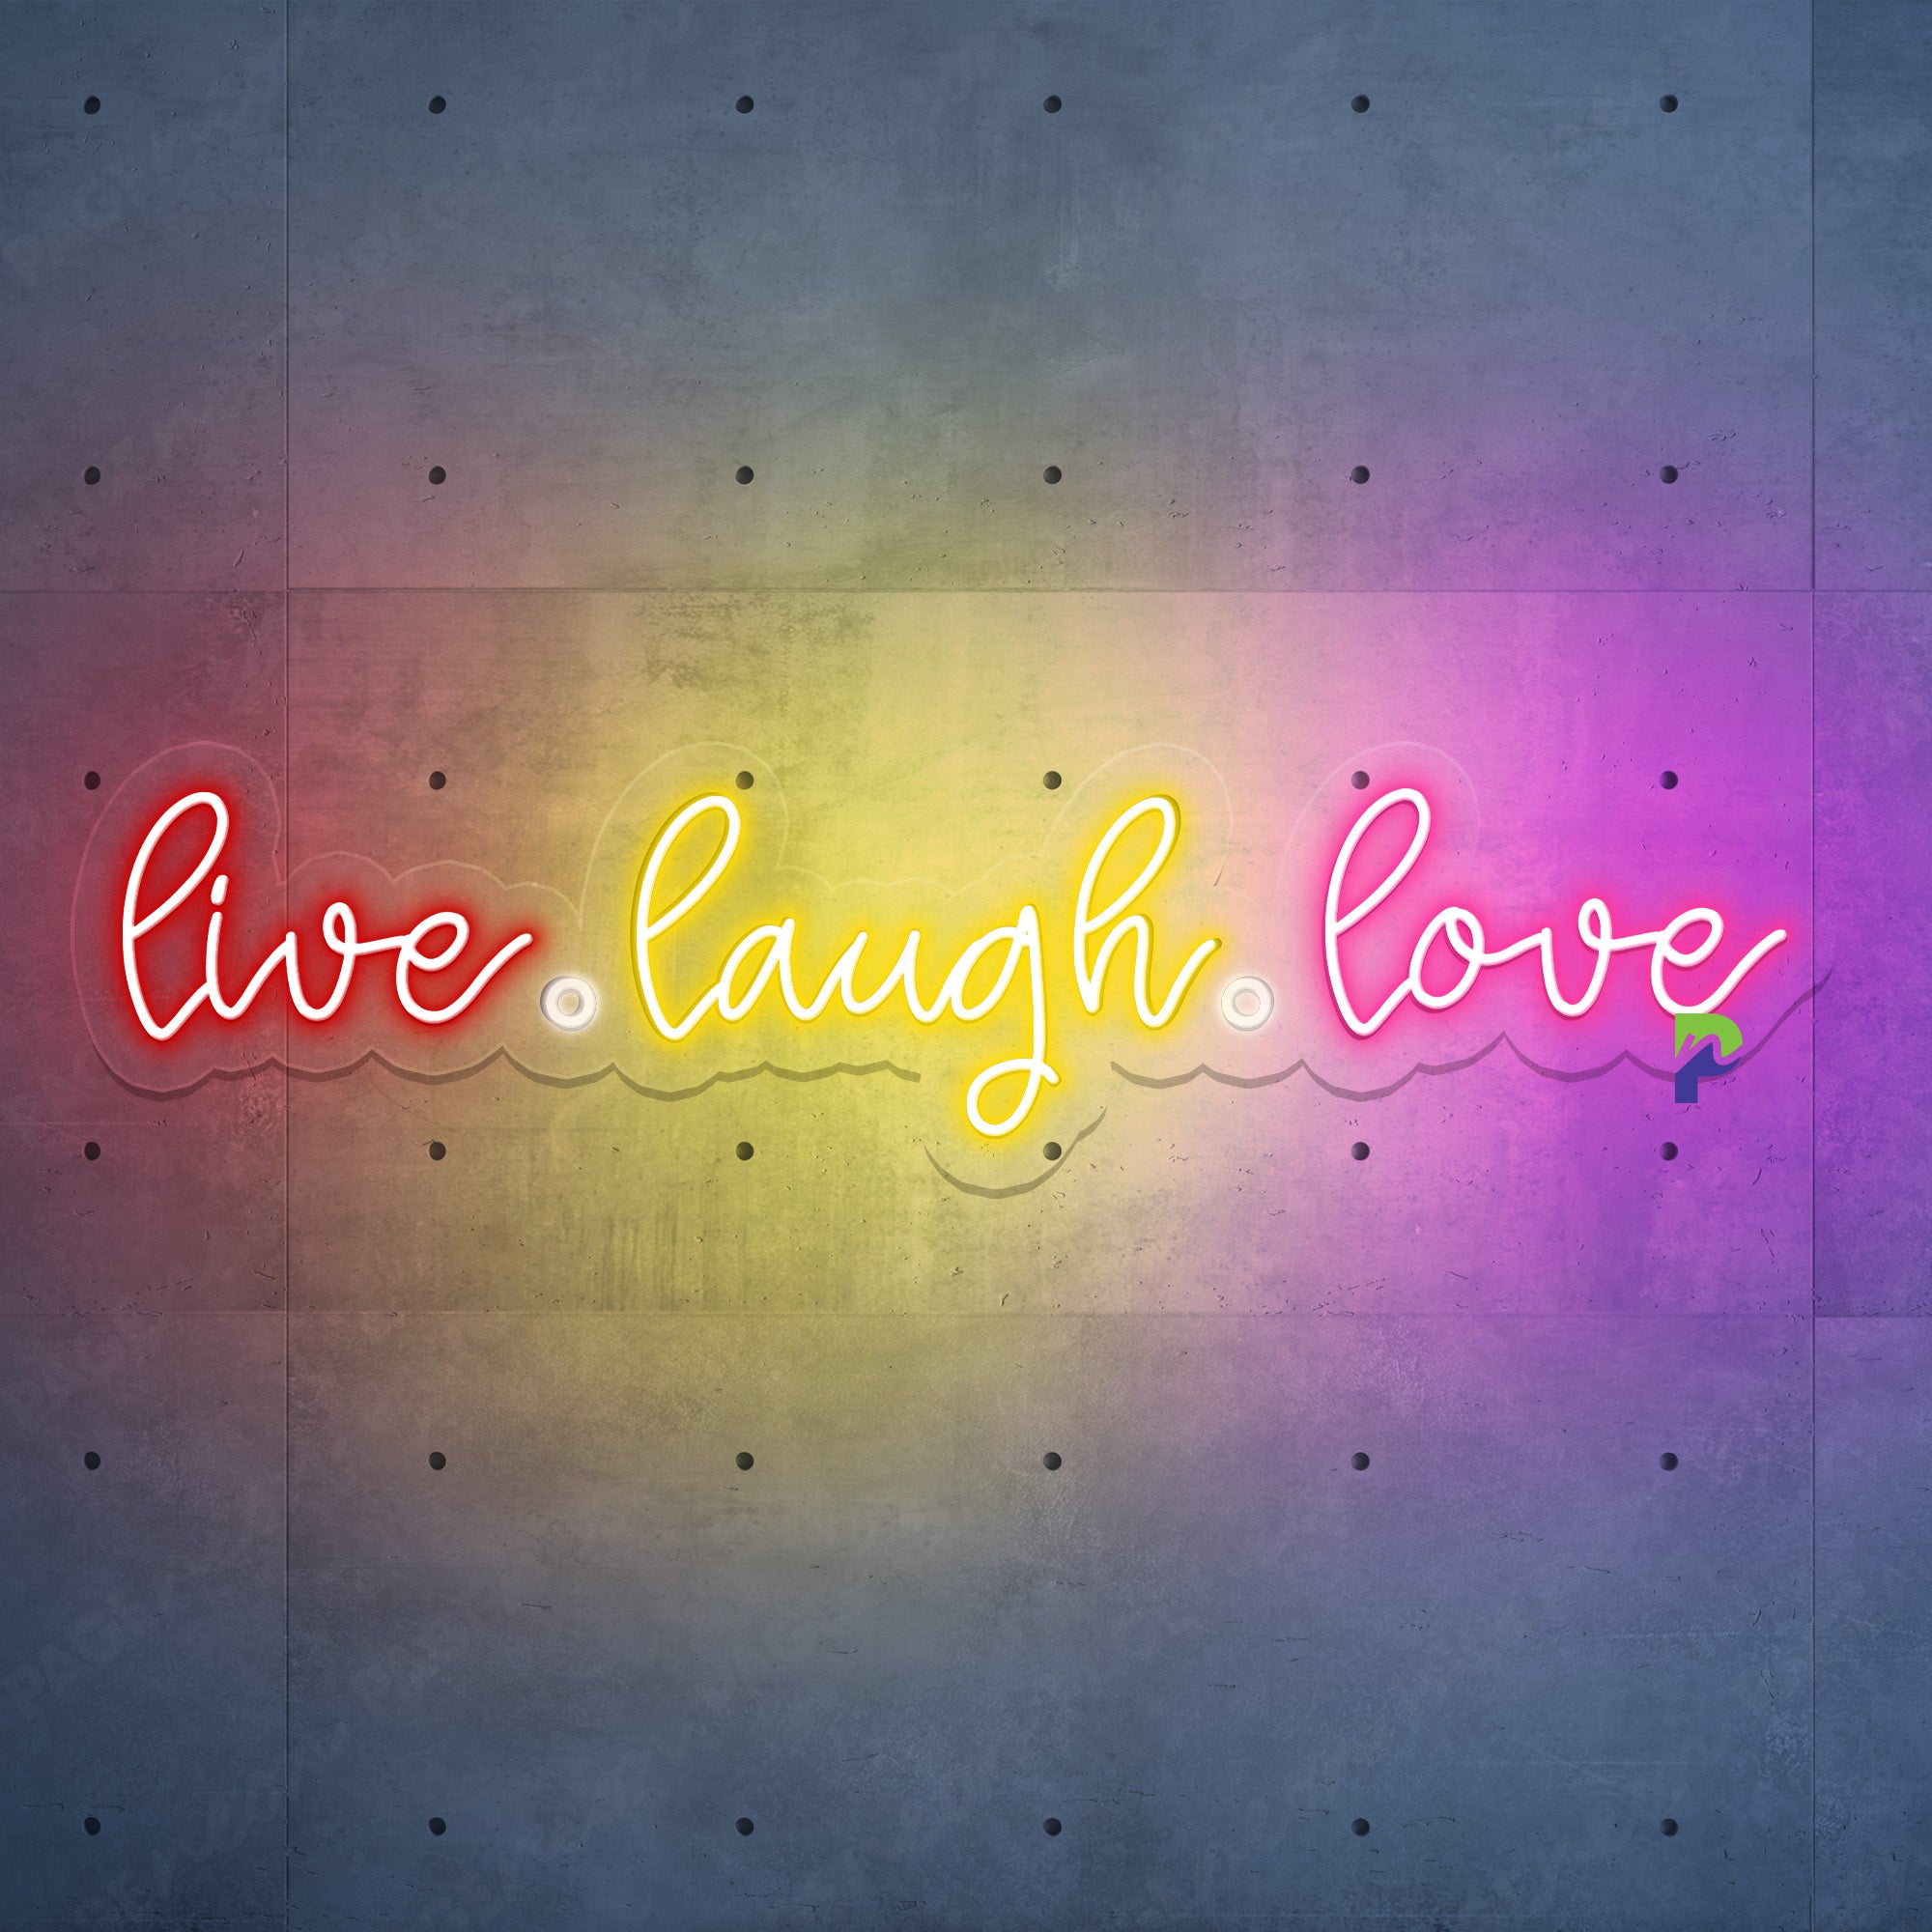 Live Laugh Love Neon Sign Colorful Inspirational Led Light